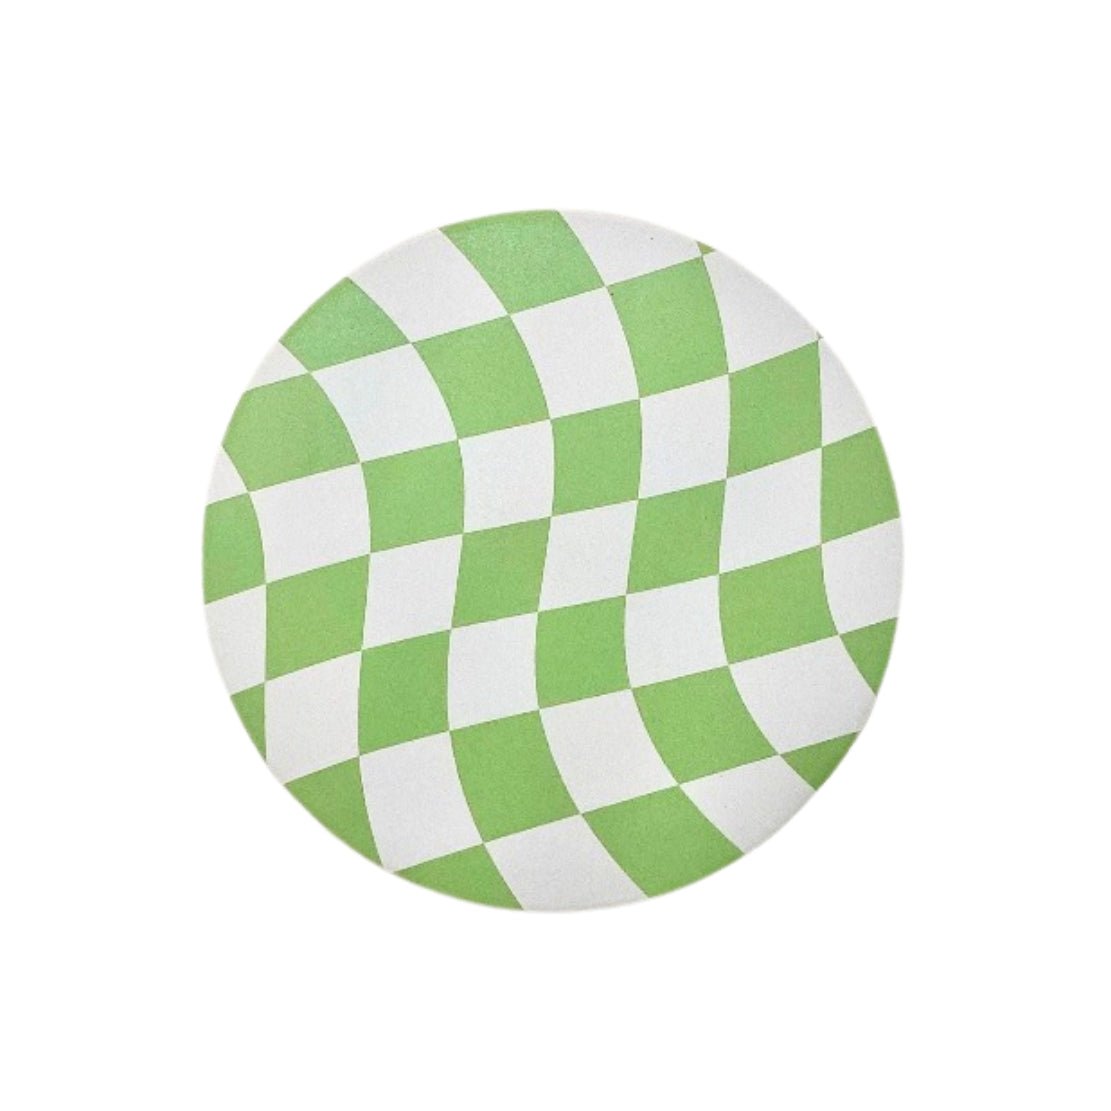 Green & white checkered pattern round cup coaster